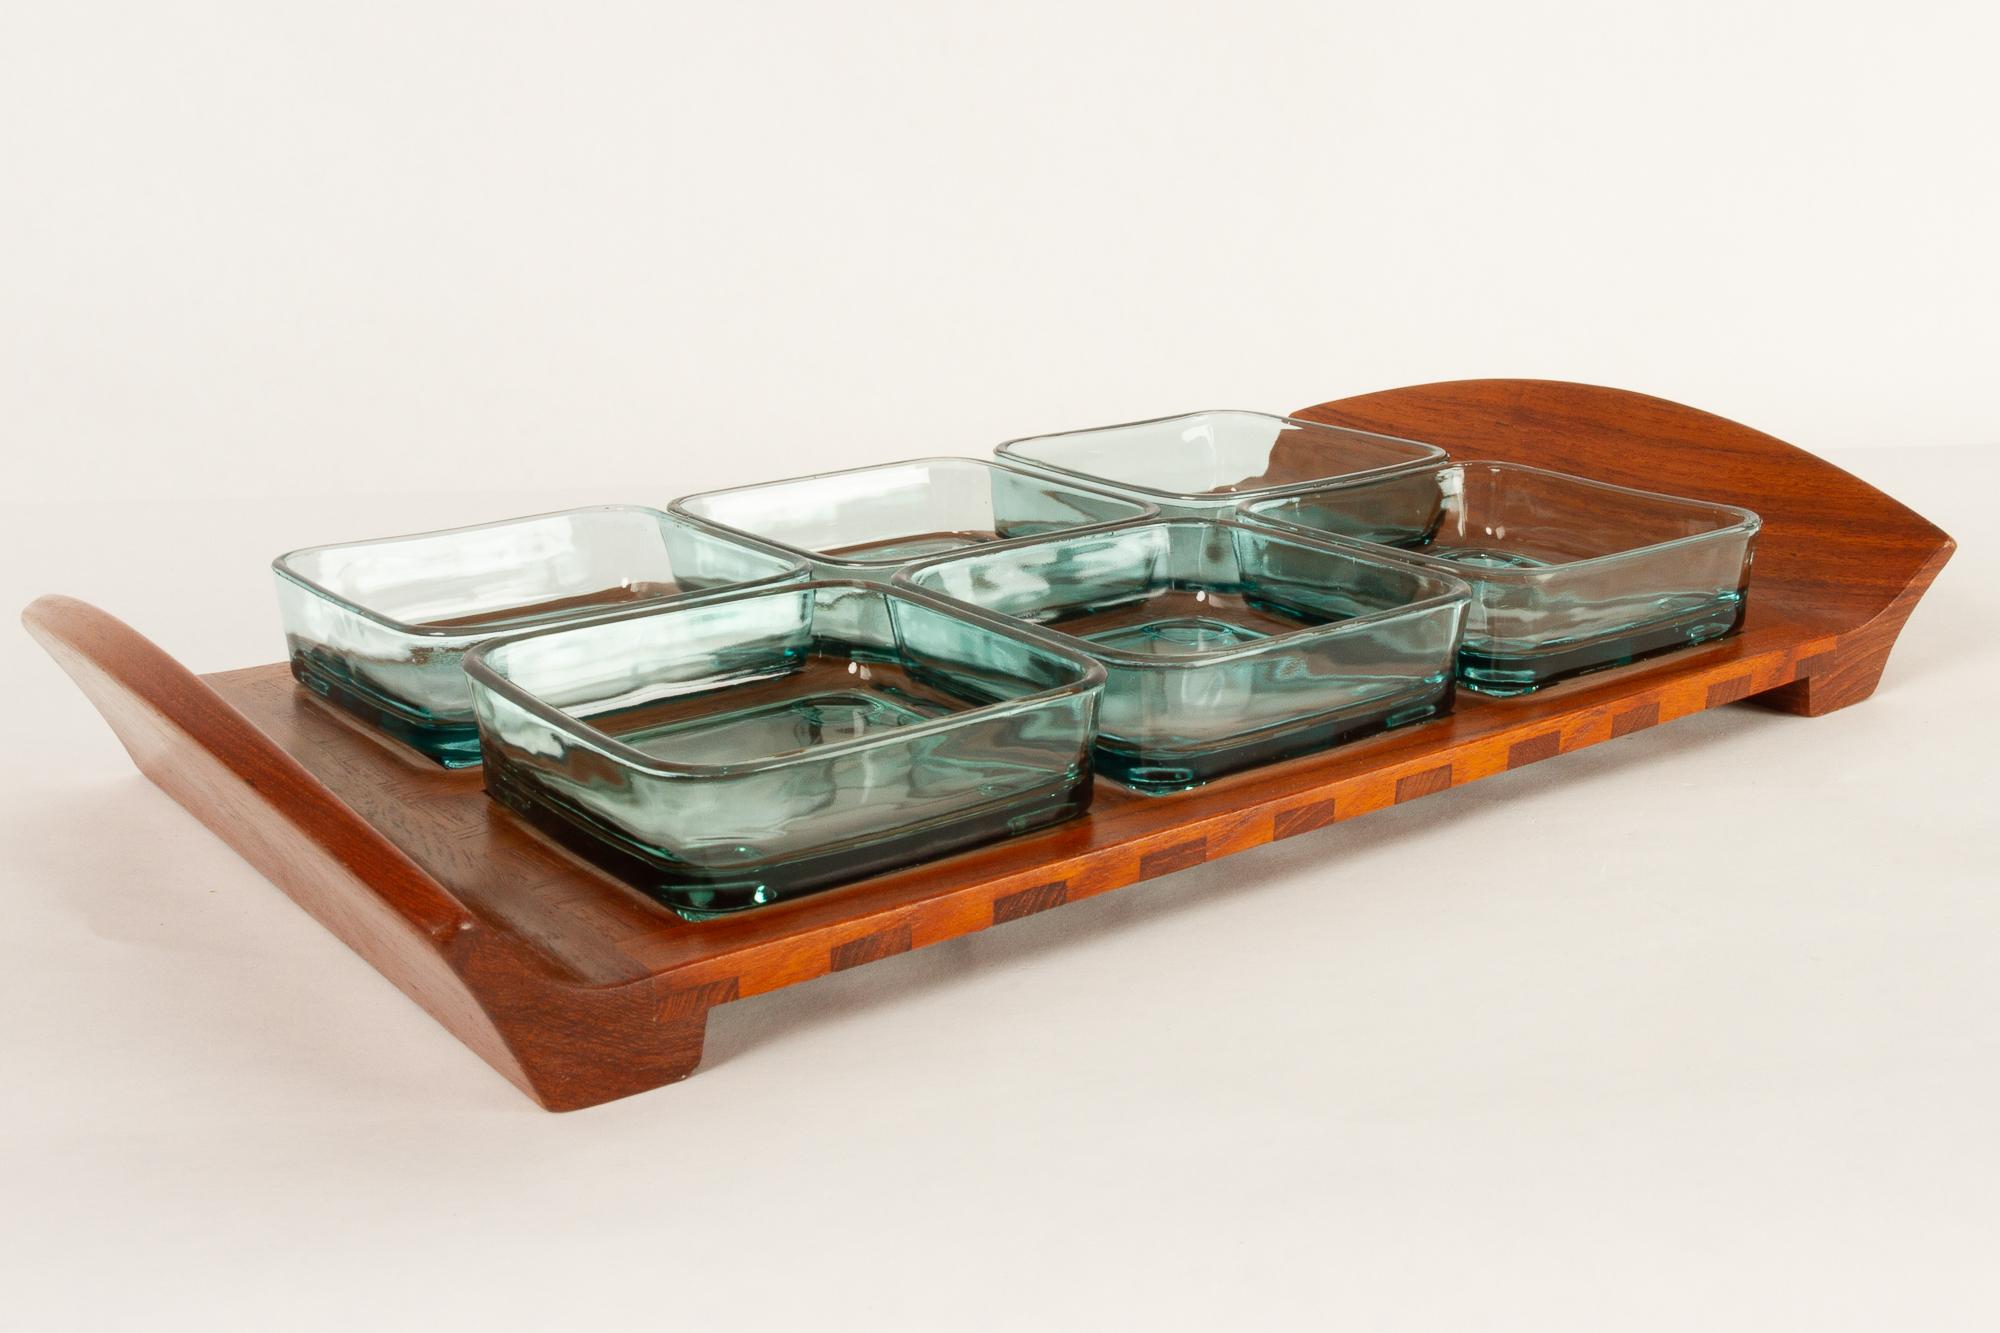 Vintage Danish teak tray with glass bowls by Jens Harald Quistgaard for IHQ Dansk Designs, 1960s.
Serving tray in solid teak with six green glass dishes. Each dish has feet that fits into the lattice on the tray. Length 46 cm. Marked JHQ